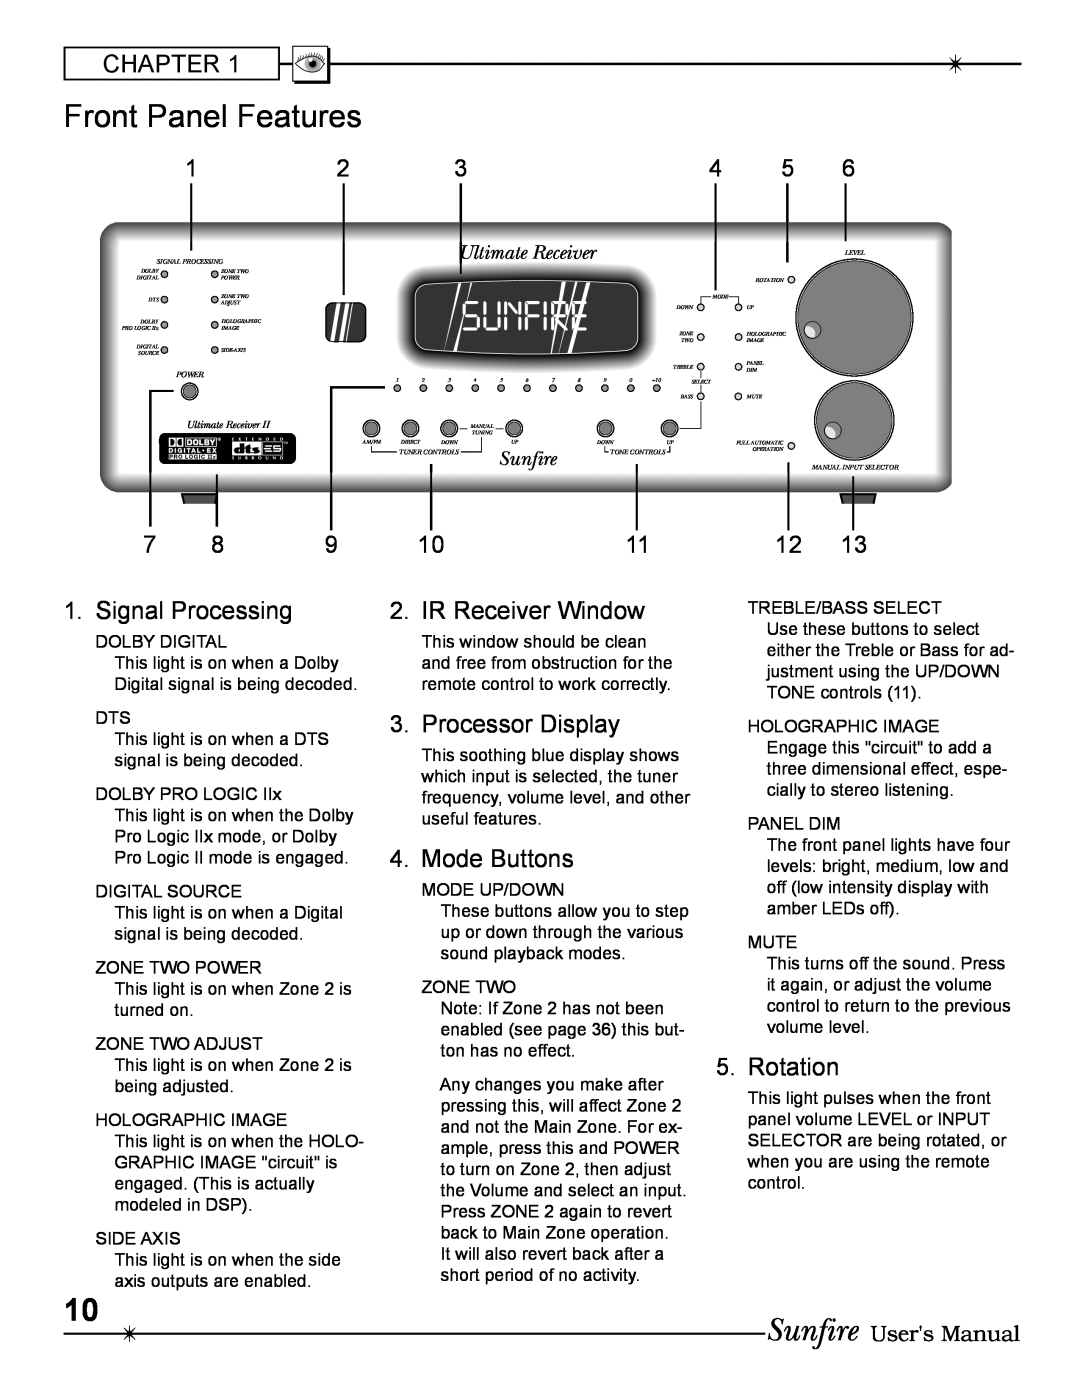 Sunfire Radio manual Front Panel Features 